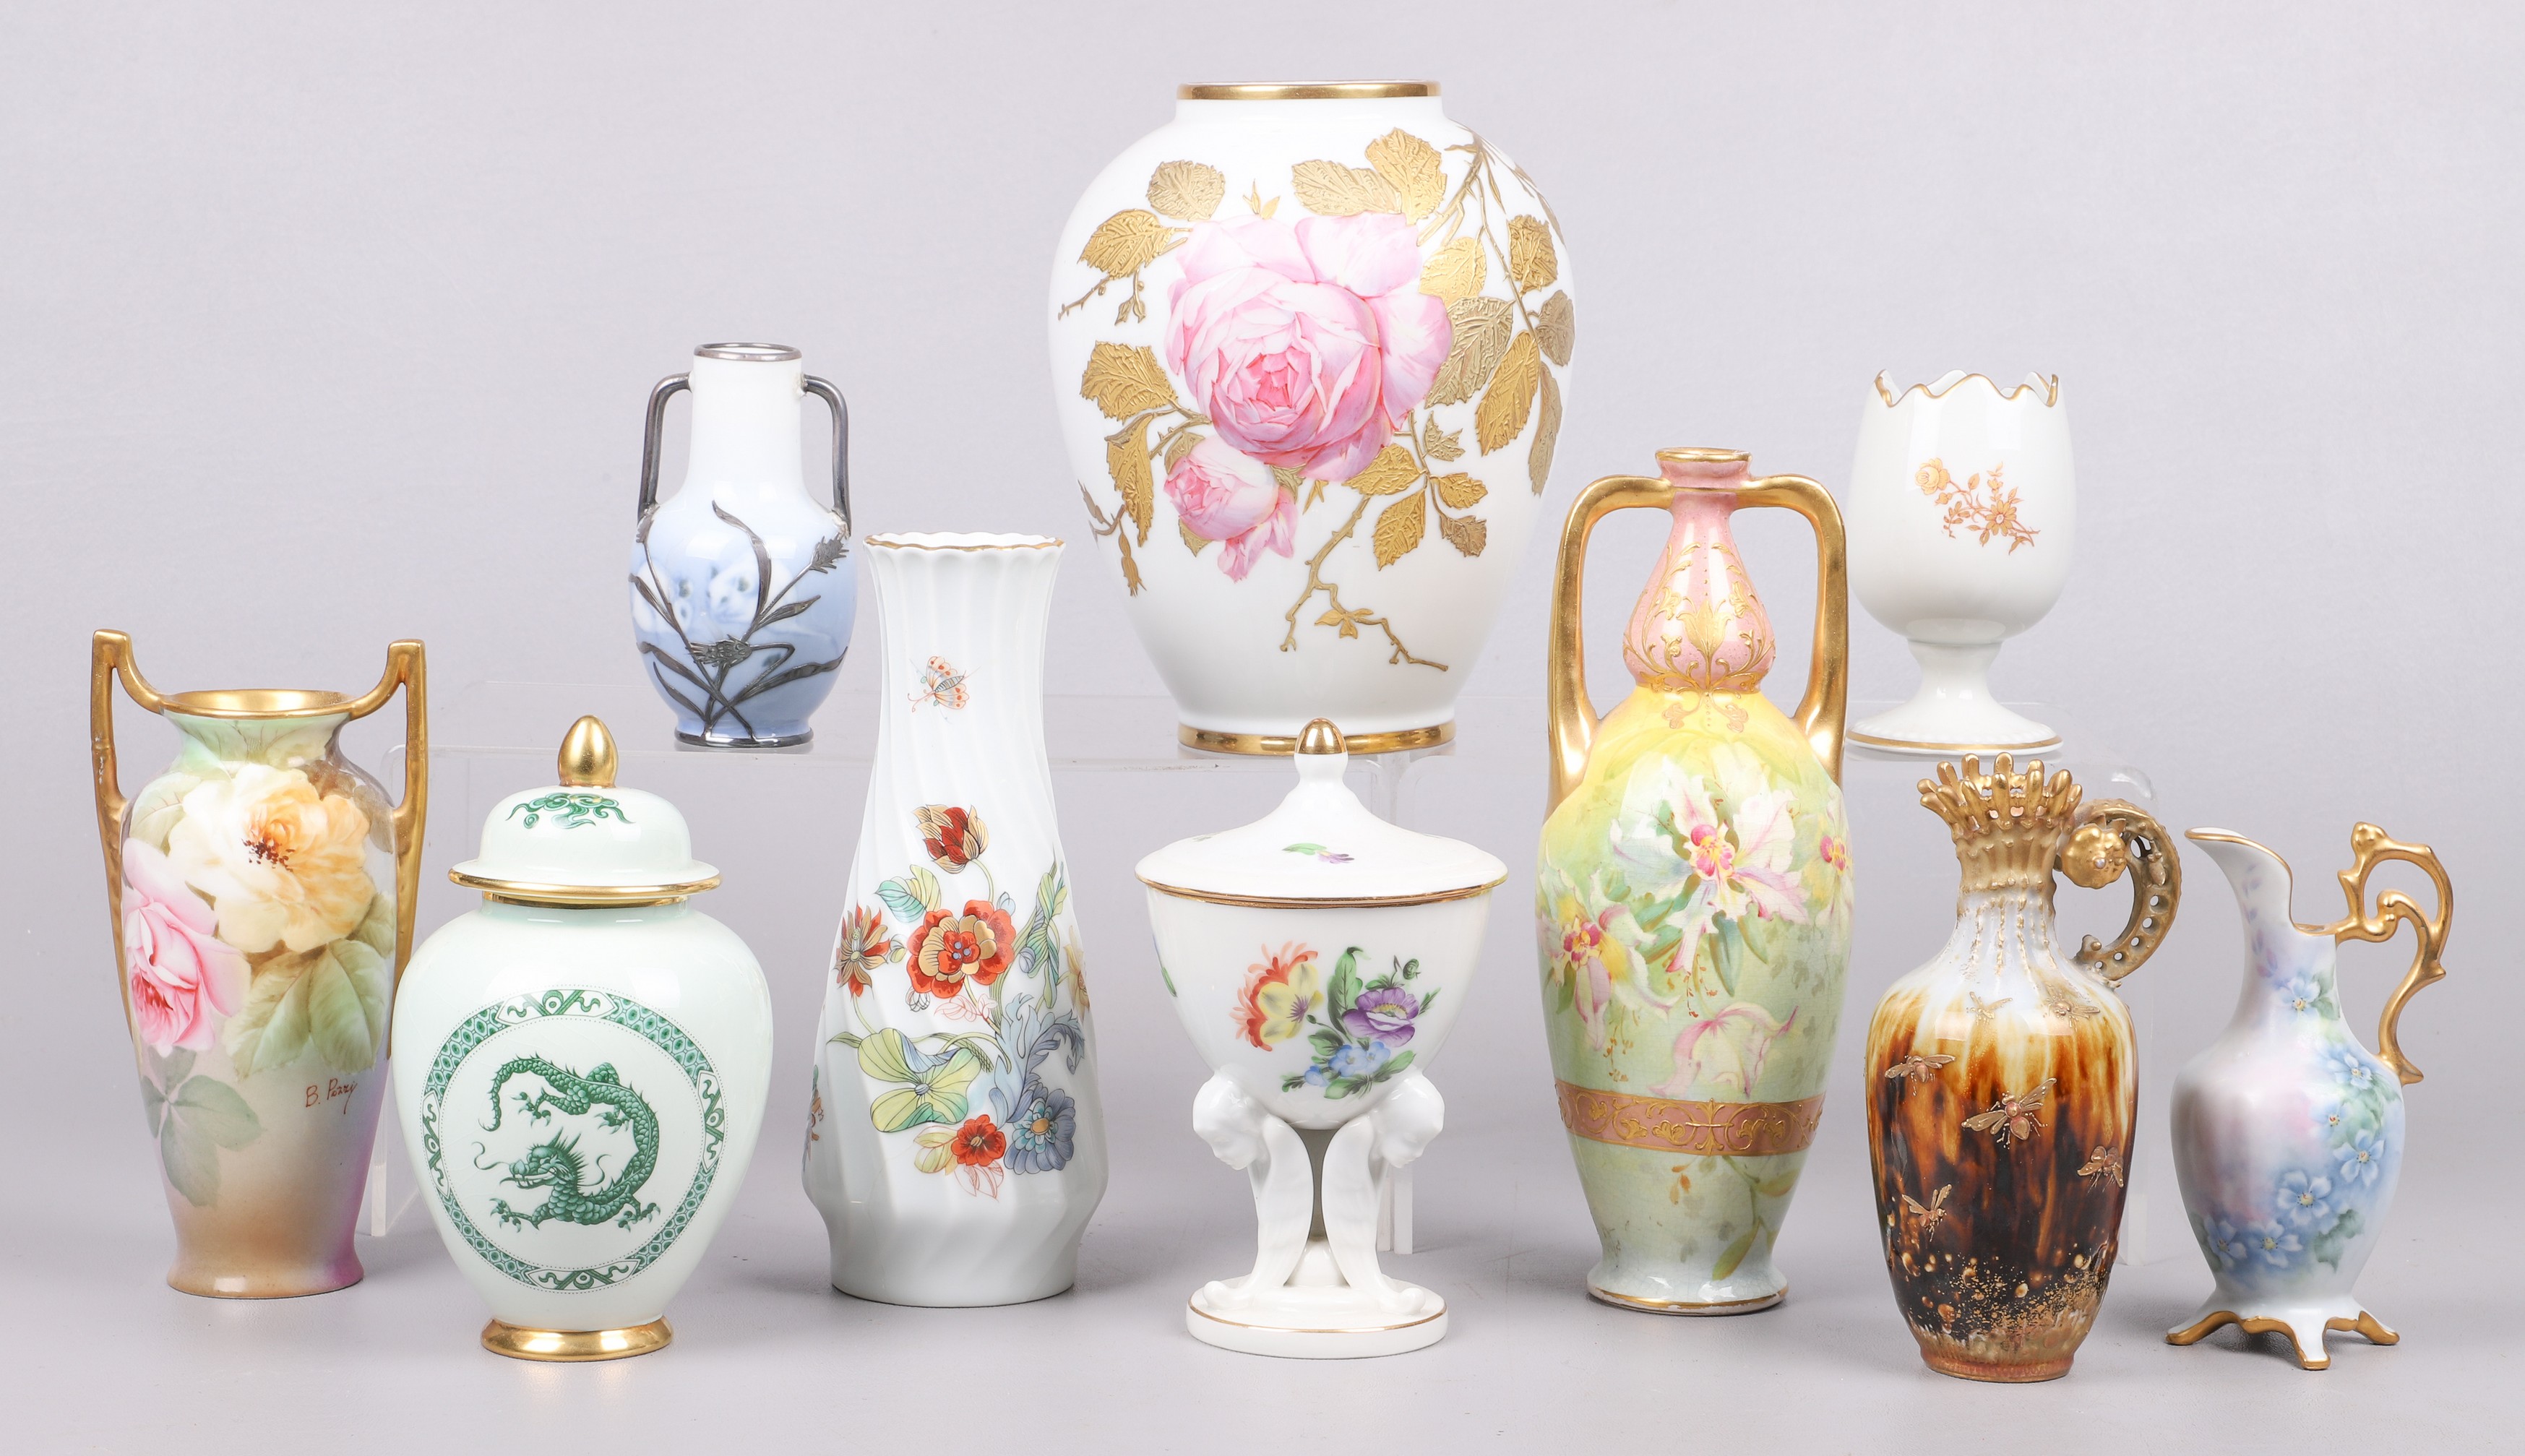 (10) Porcelain vases and urns to